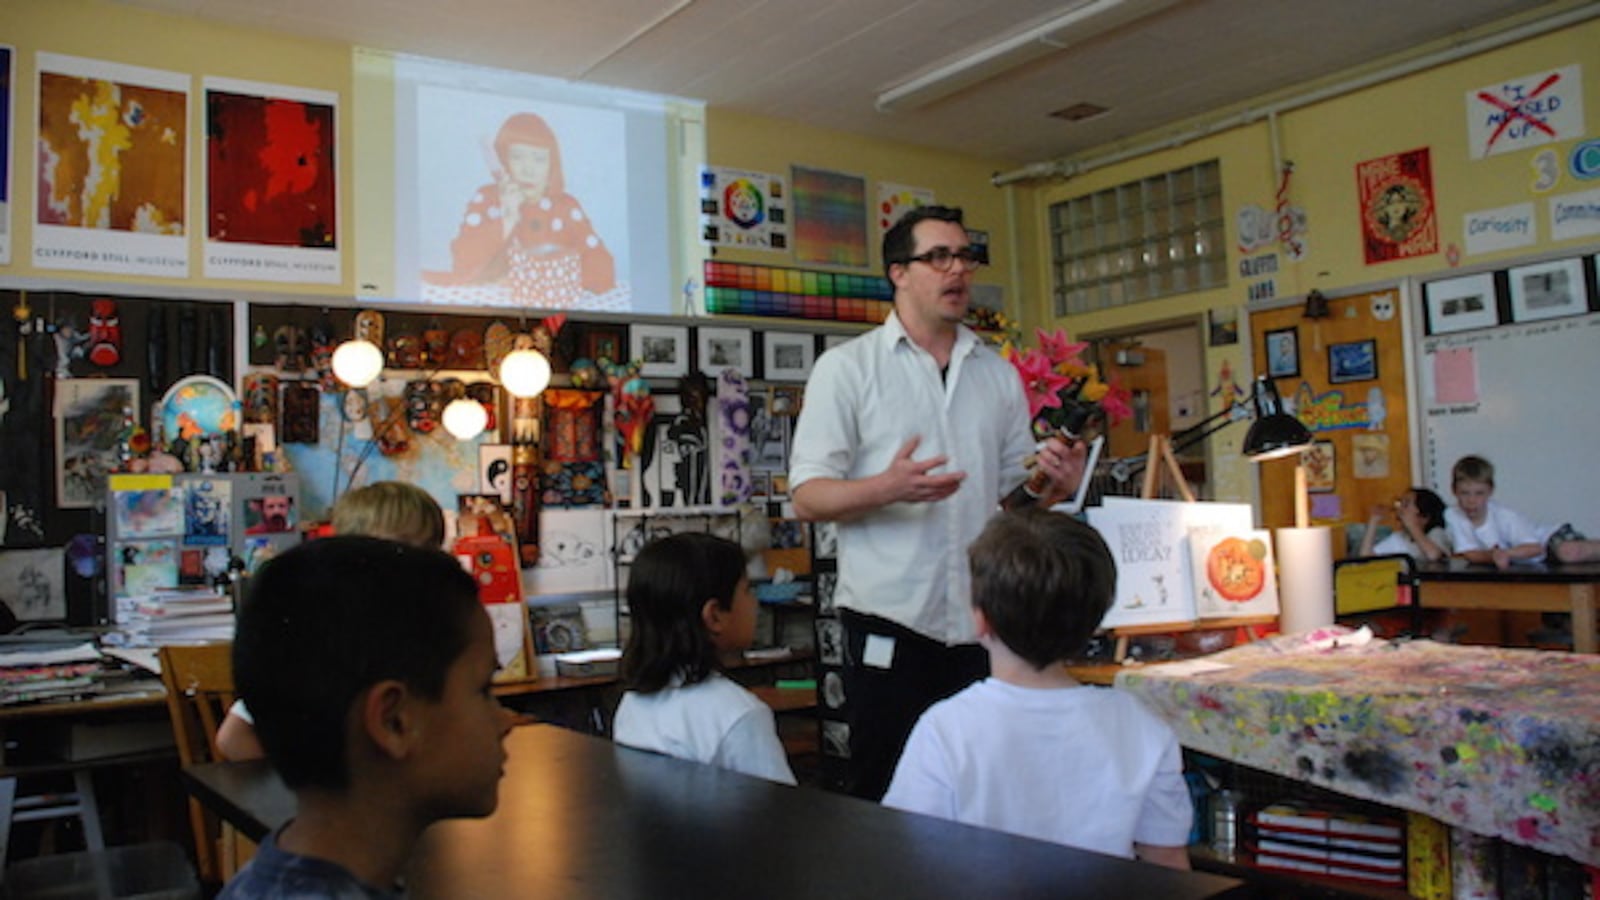 Brown Elementary School art teacher Barth Quenzer introduces his students to Japanese artist Yayoi Kusama.